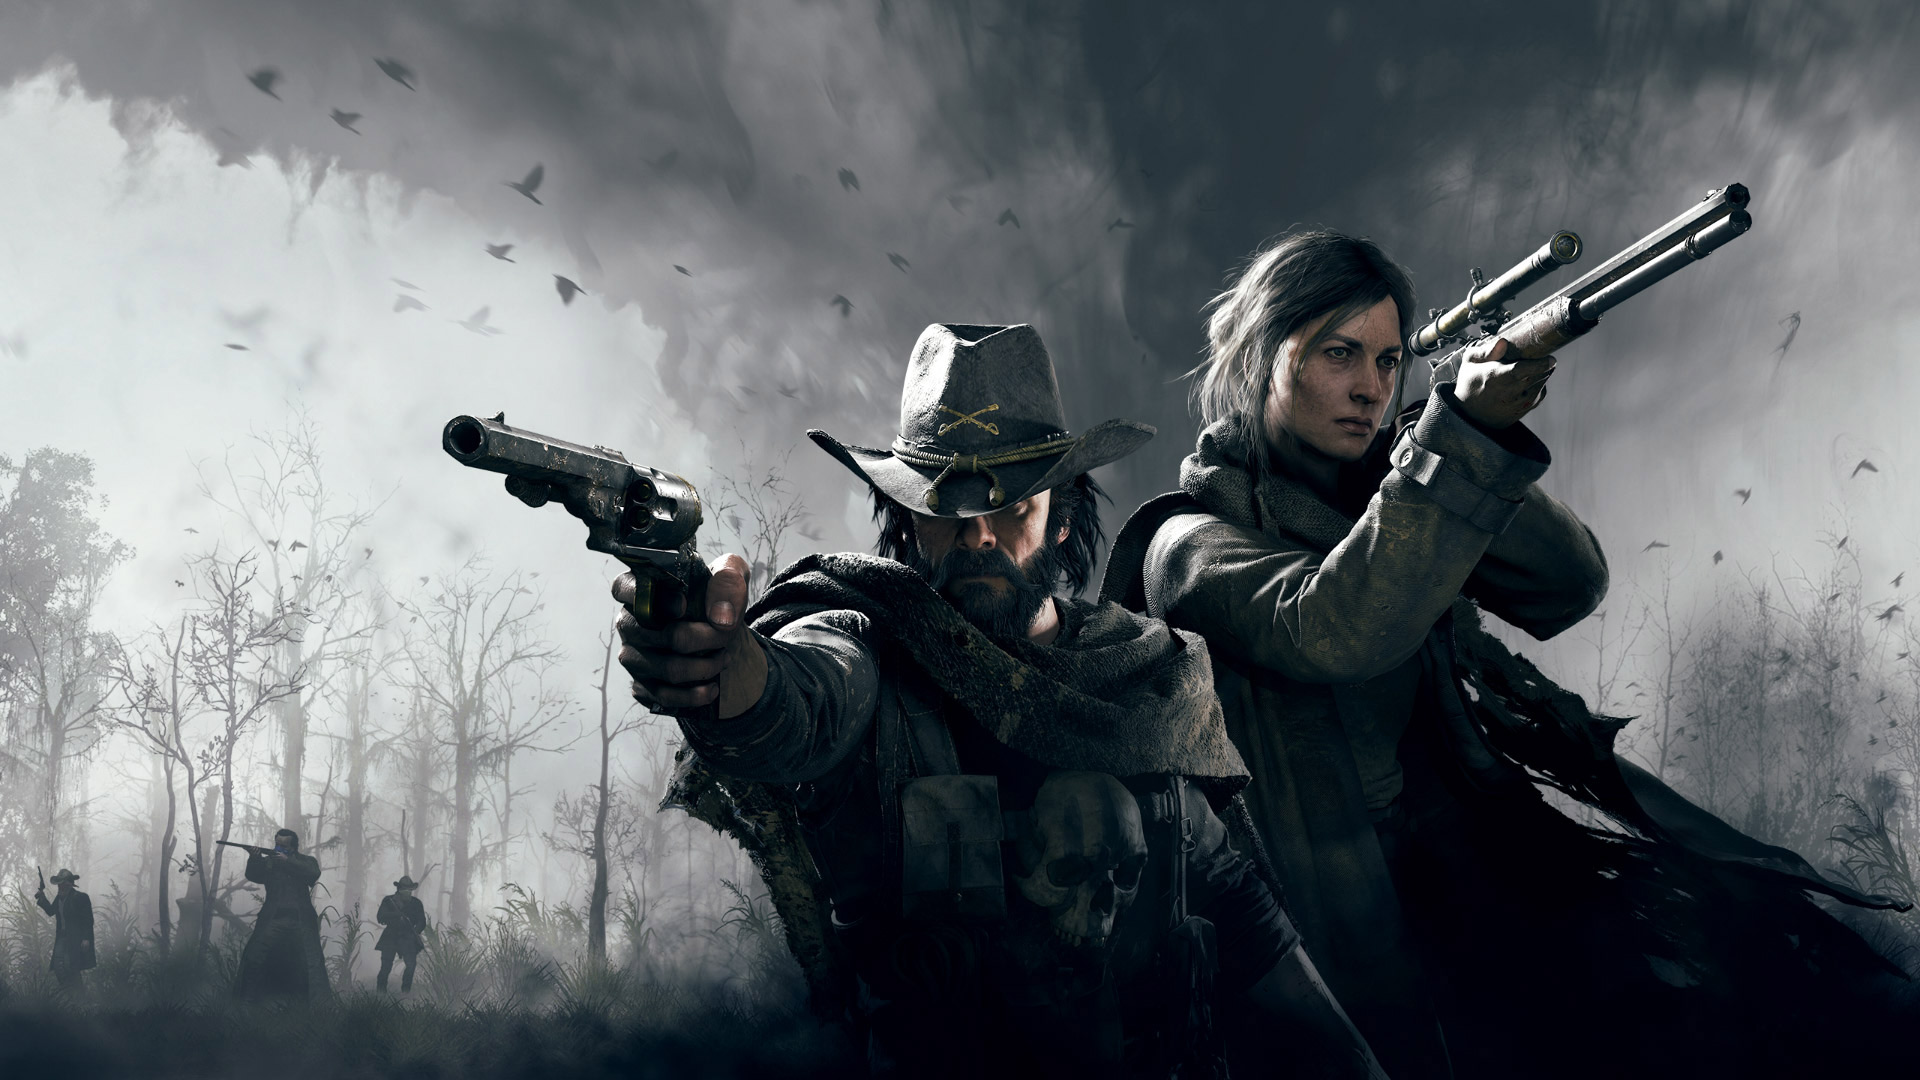 Hunt: Showdown is dropping PS4 and Xbox One support in August